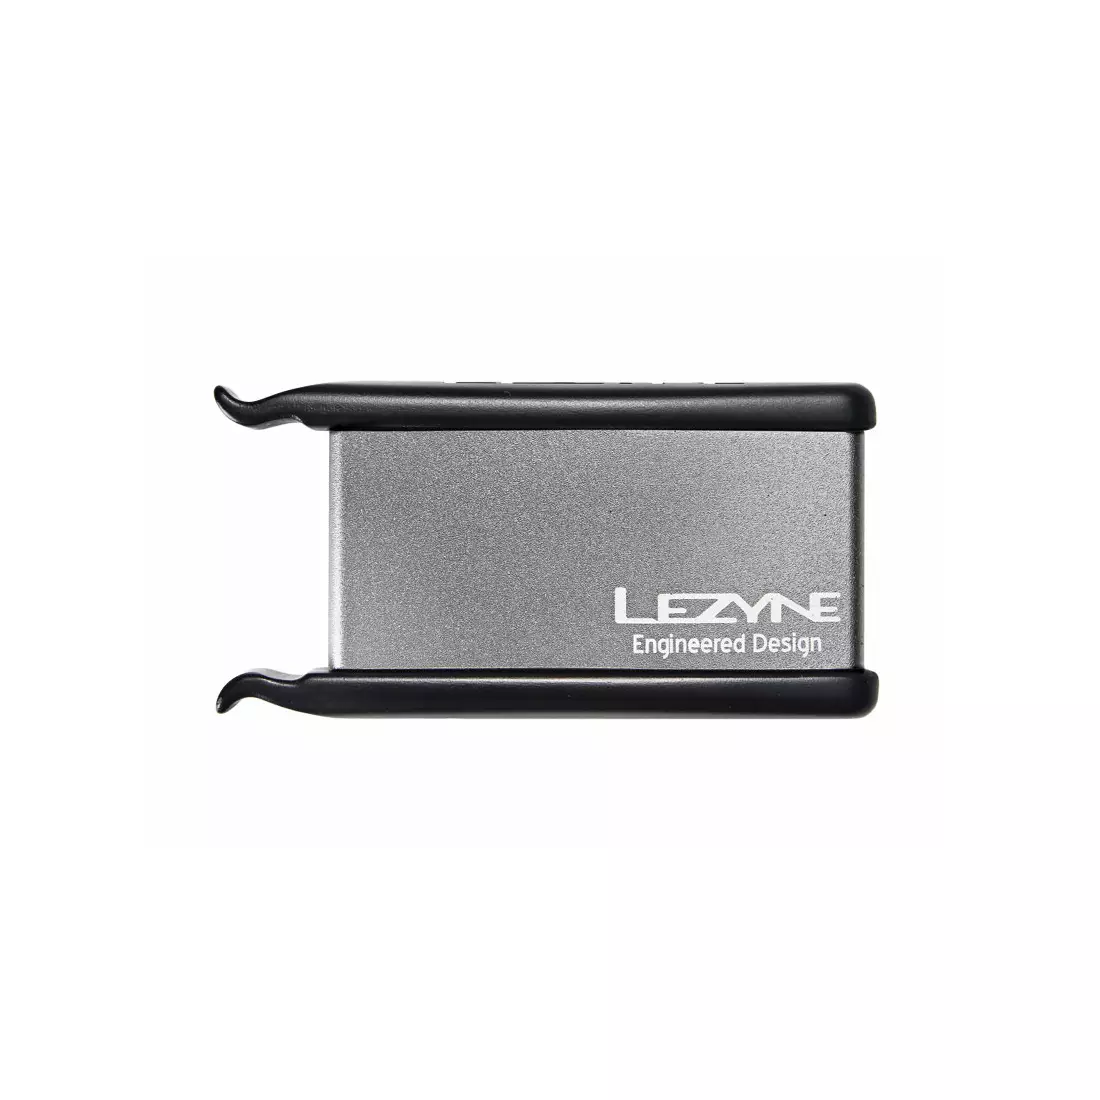 Tube patches LEZYNE LEVER KIT pudełko 2x Spoons, 6x gray adhesive patches LZN-1-PK-LEVER-V16P